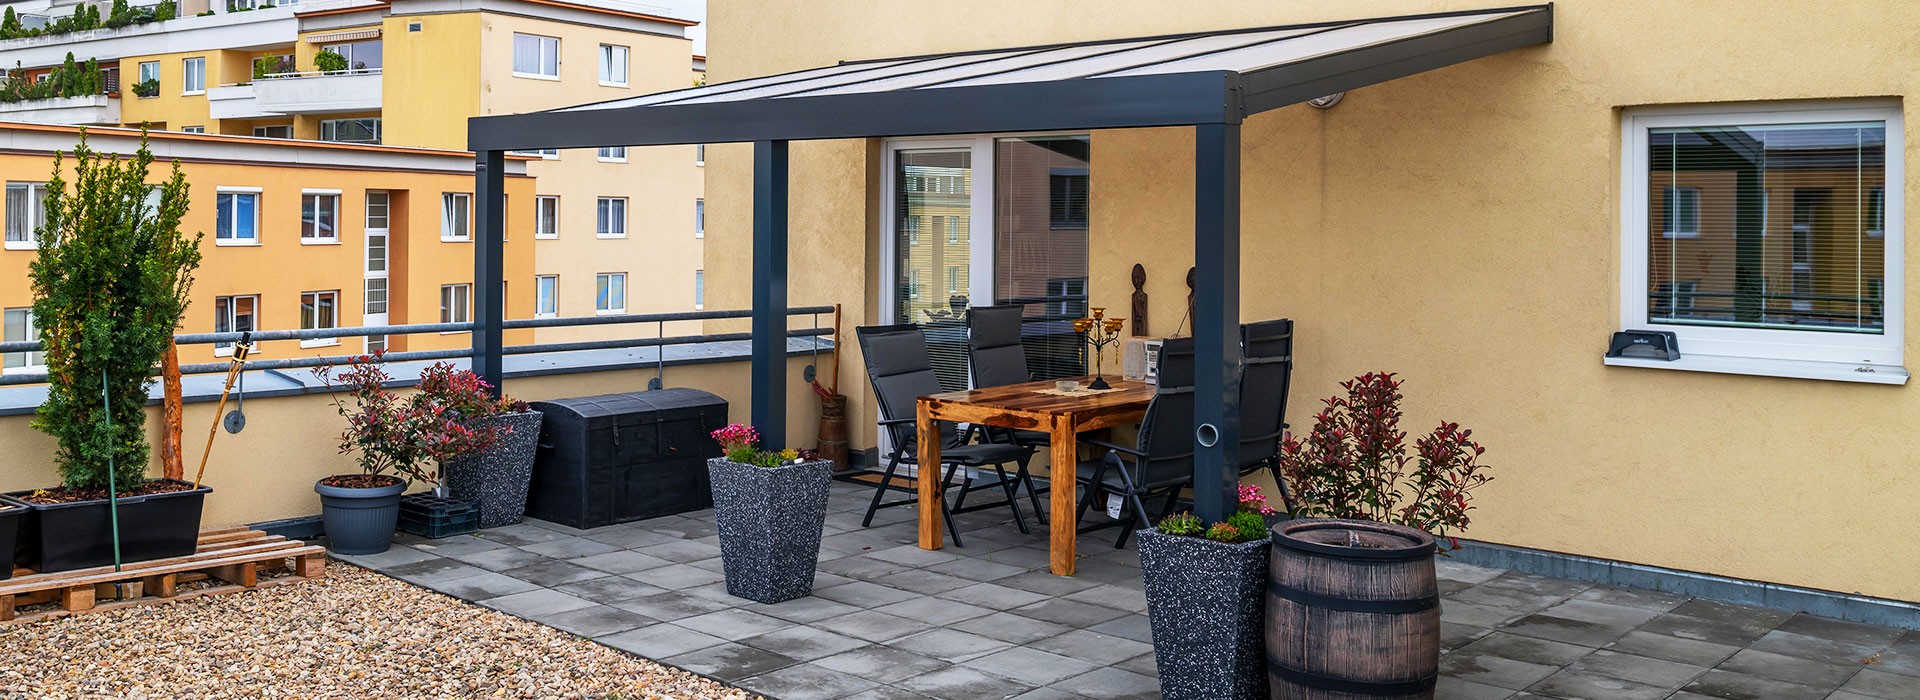 Aluminum pergolas with roofing in the form of polycarbonate